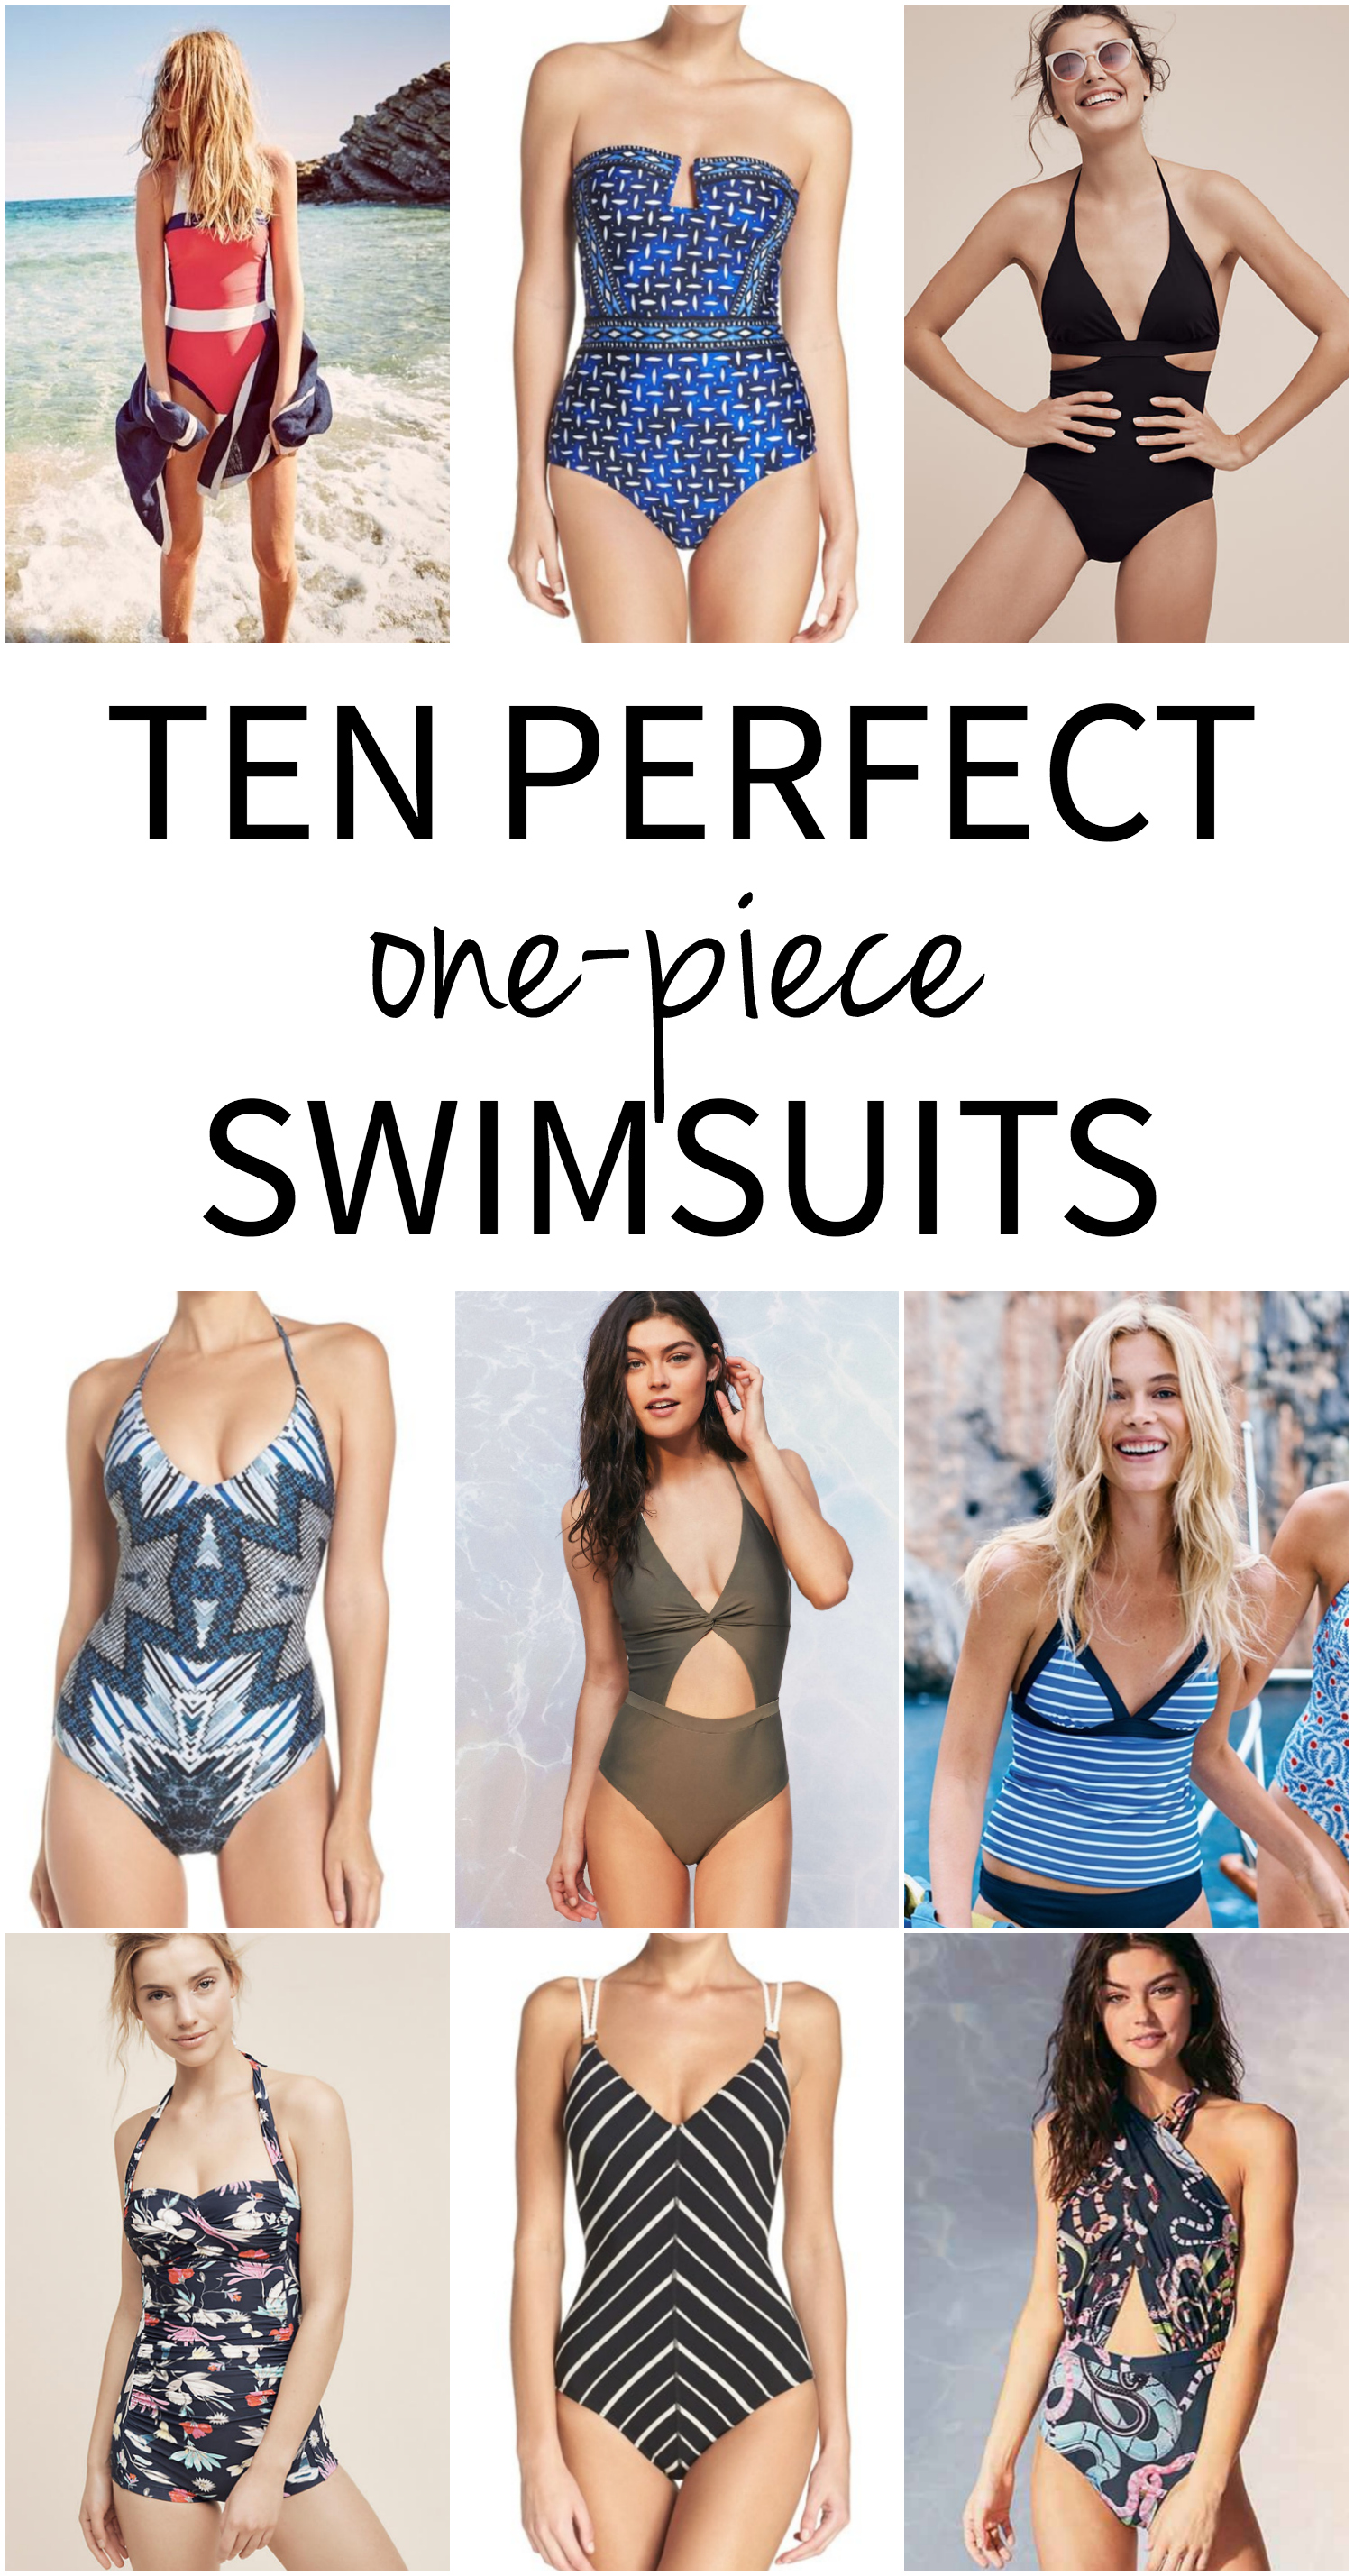 https://www.thechroniclesofhome.com/wp-content/uploads/2017/02/ONE-PIECE-SWIMSUITS.jpg